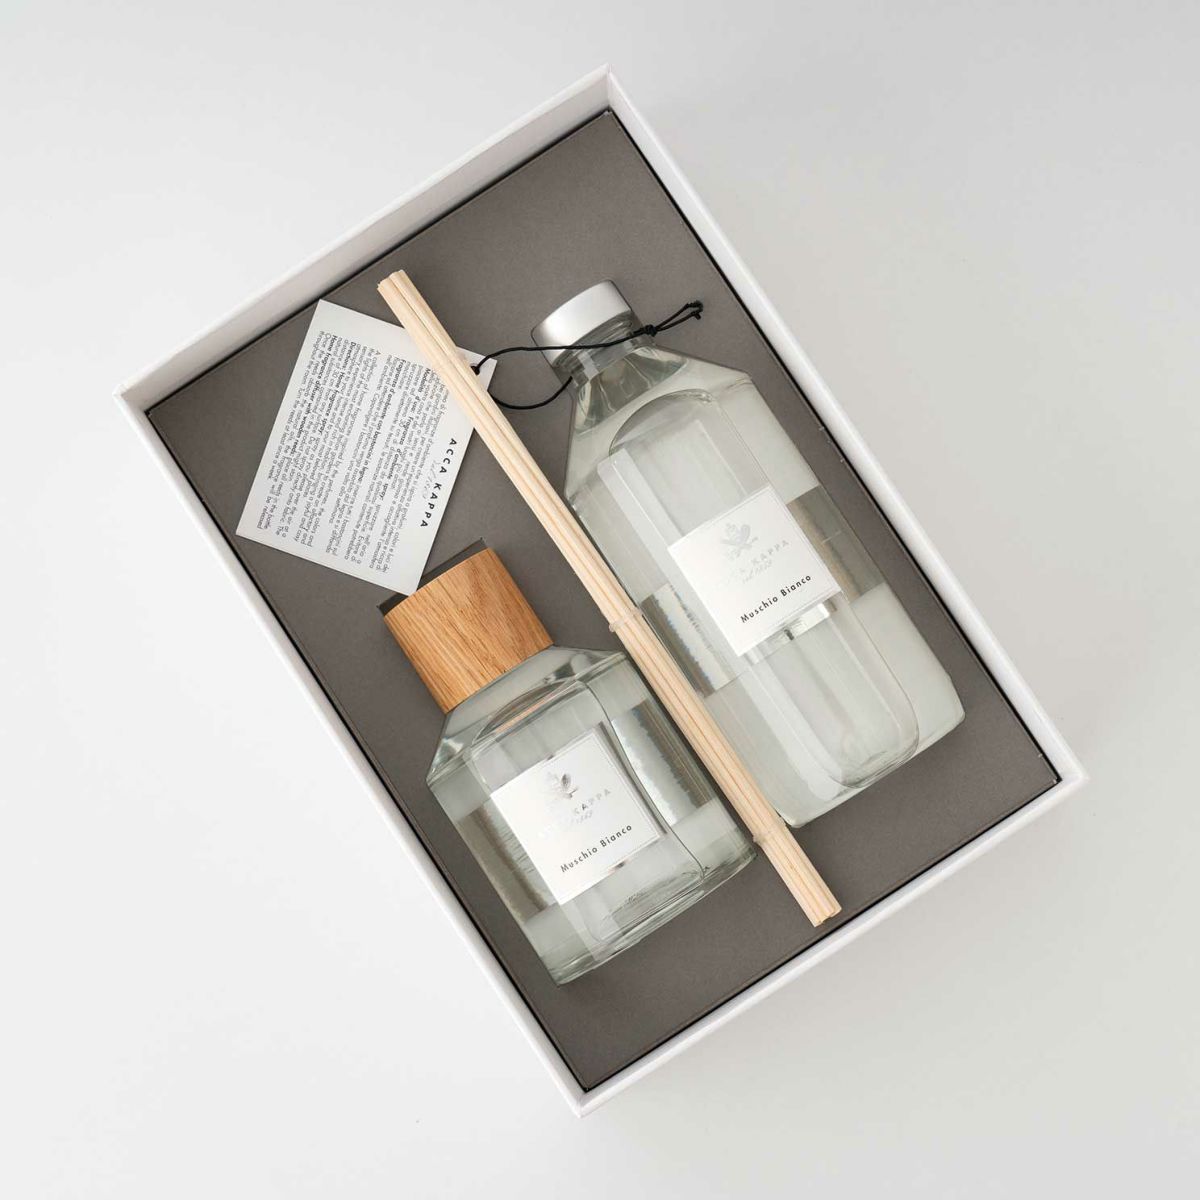 Acca Kappa White Moss Diffuser Gift Set - Value $188.00